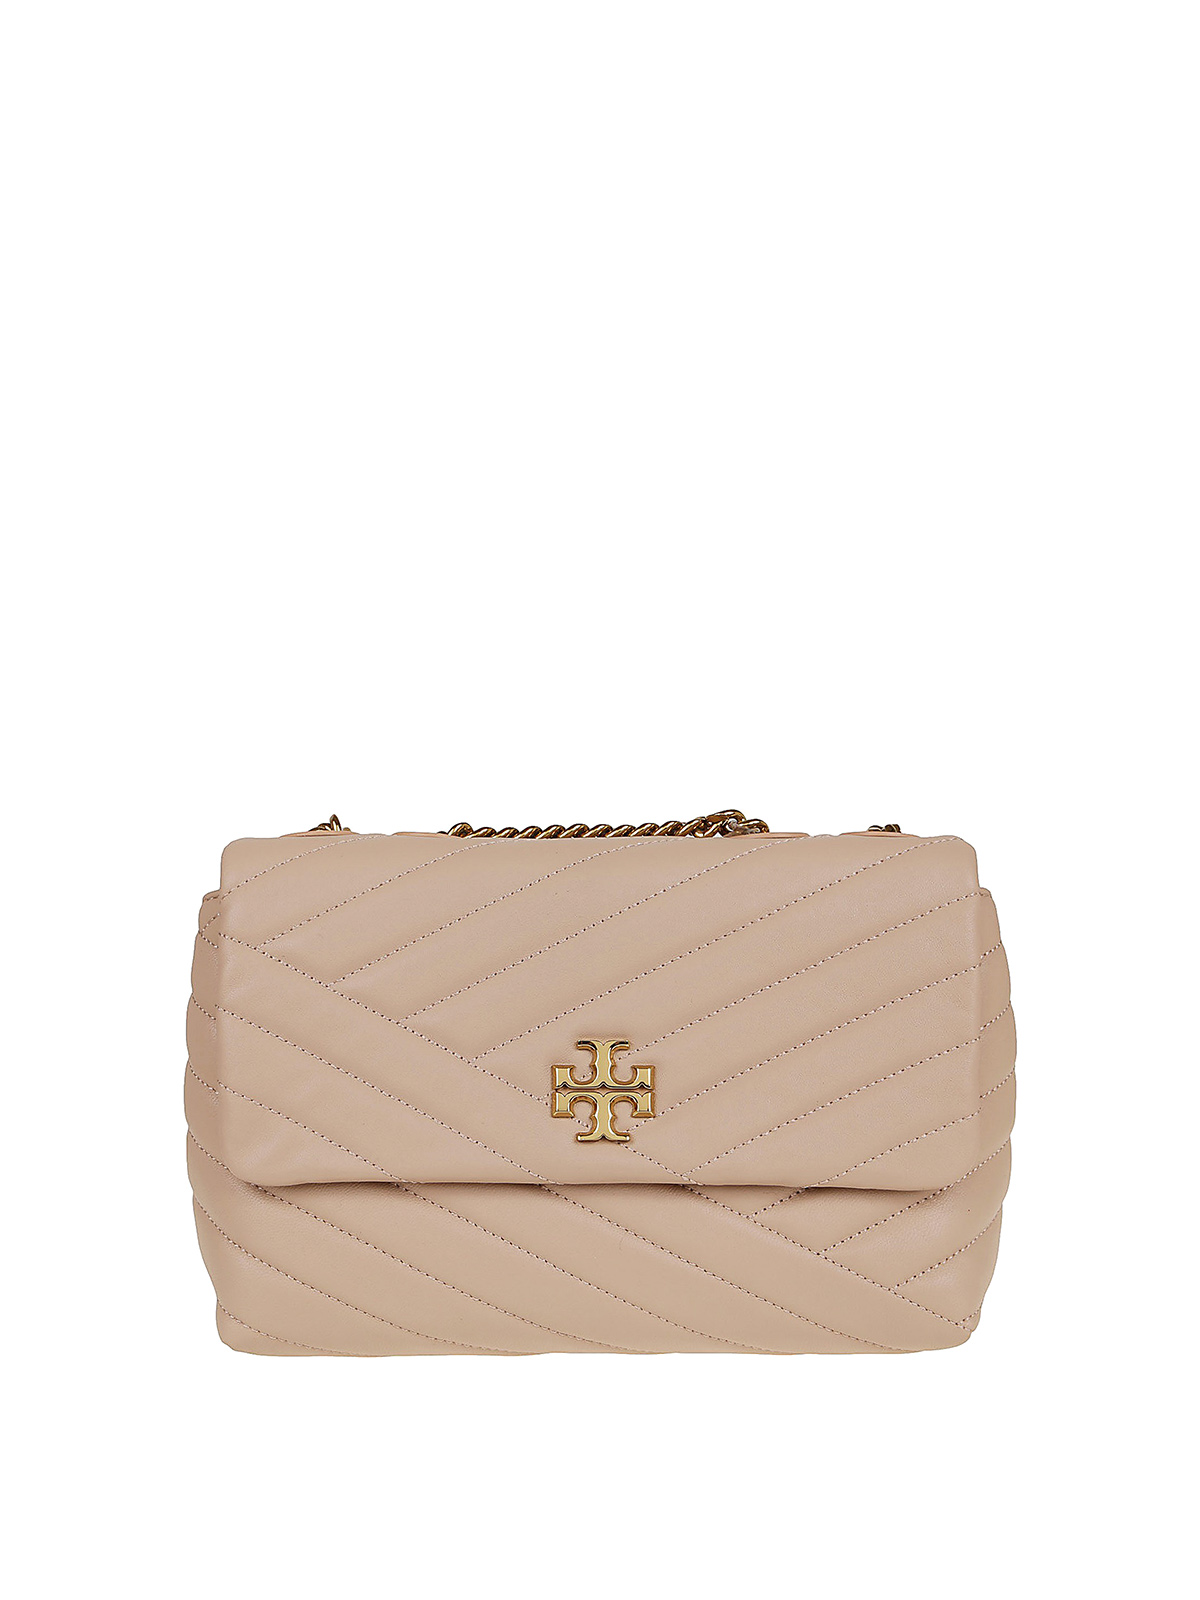 Sand Color Leather Kira Chevron Wallet by Tory Burch in Neutrals